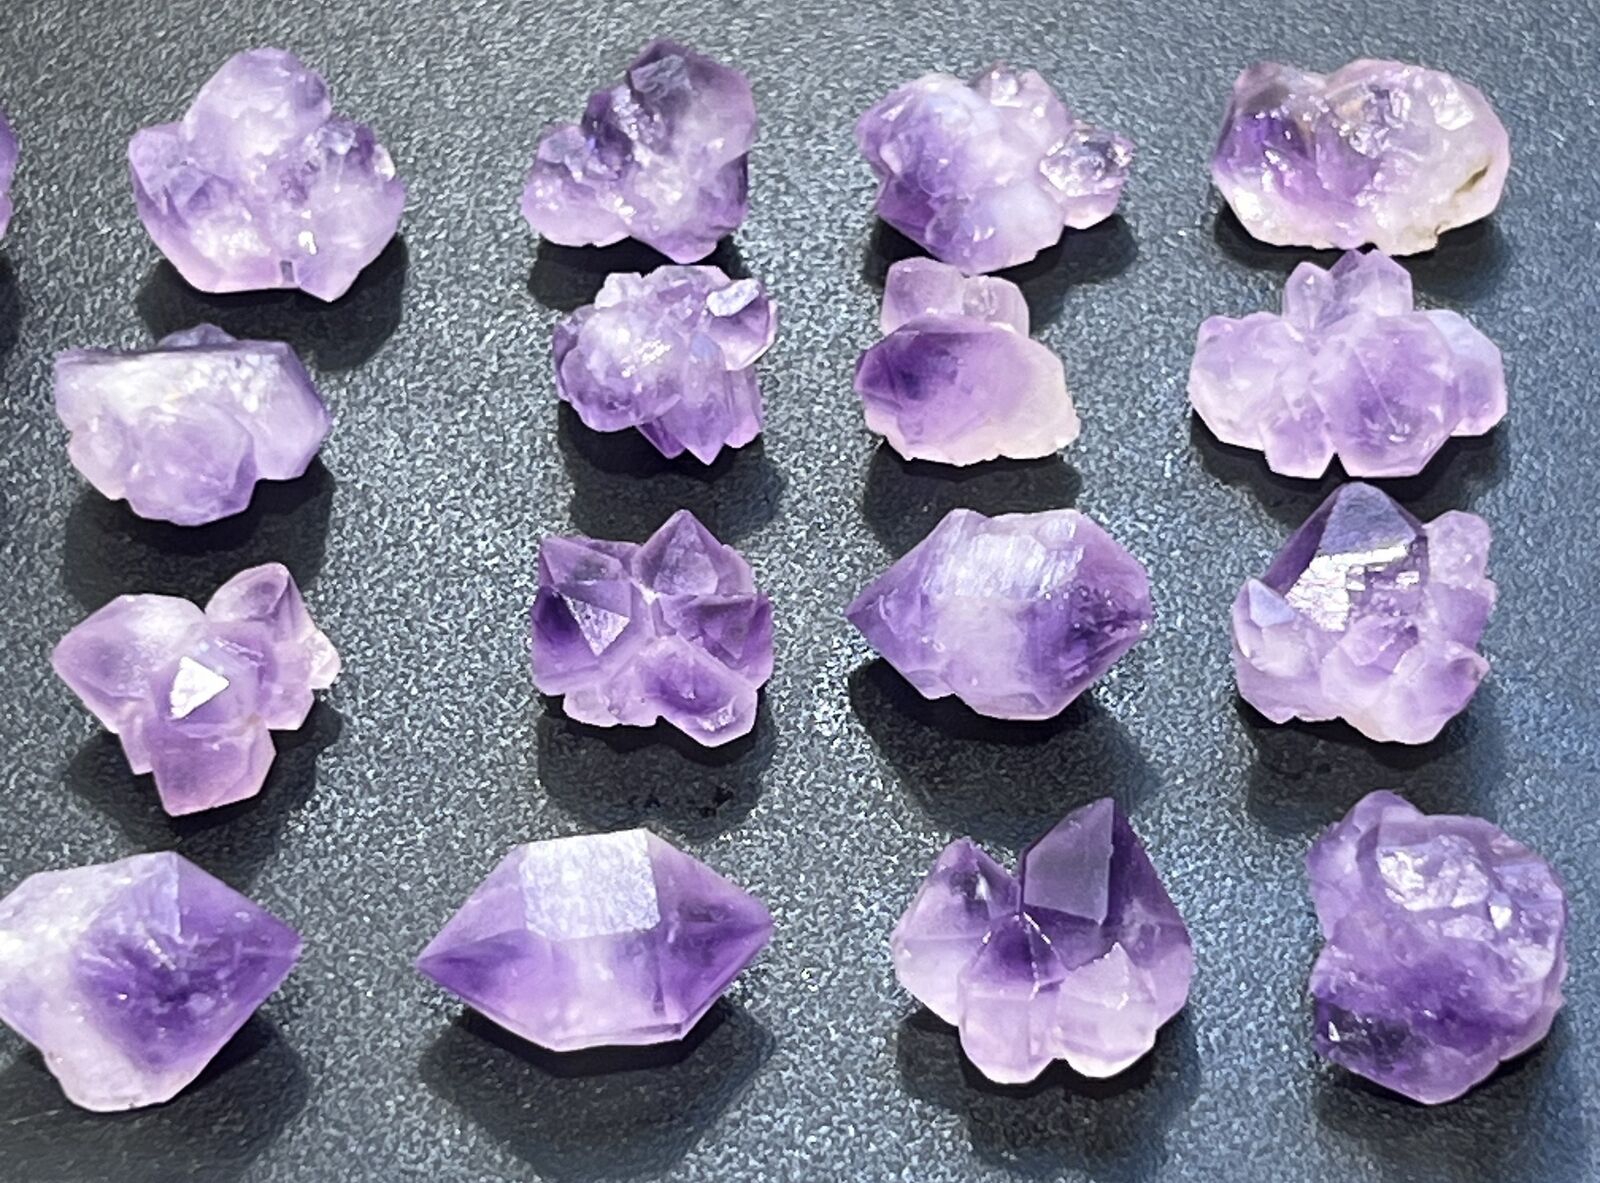 Amethyst Mini Crystal Clusters (1 LB) One Pound Bulk Wholesale Lot Raw Natural